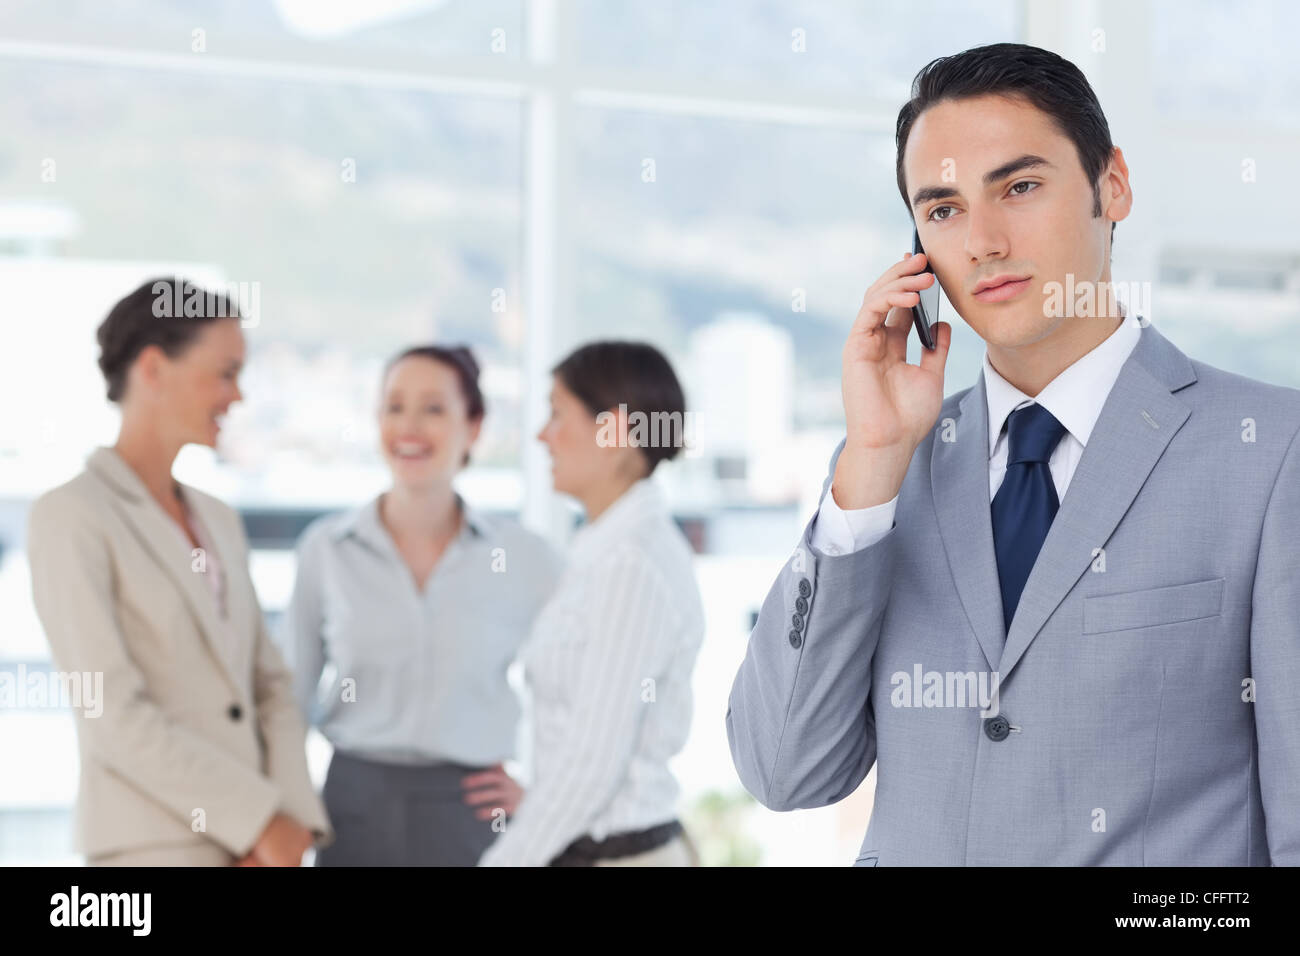 Businessman on his cellphone with colleagues behind him Stock Photo